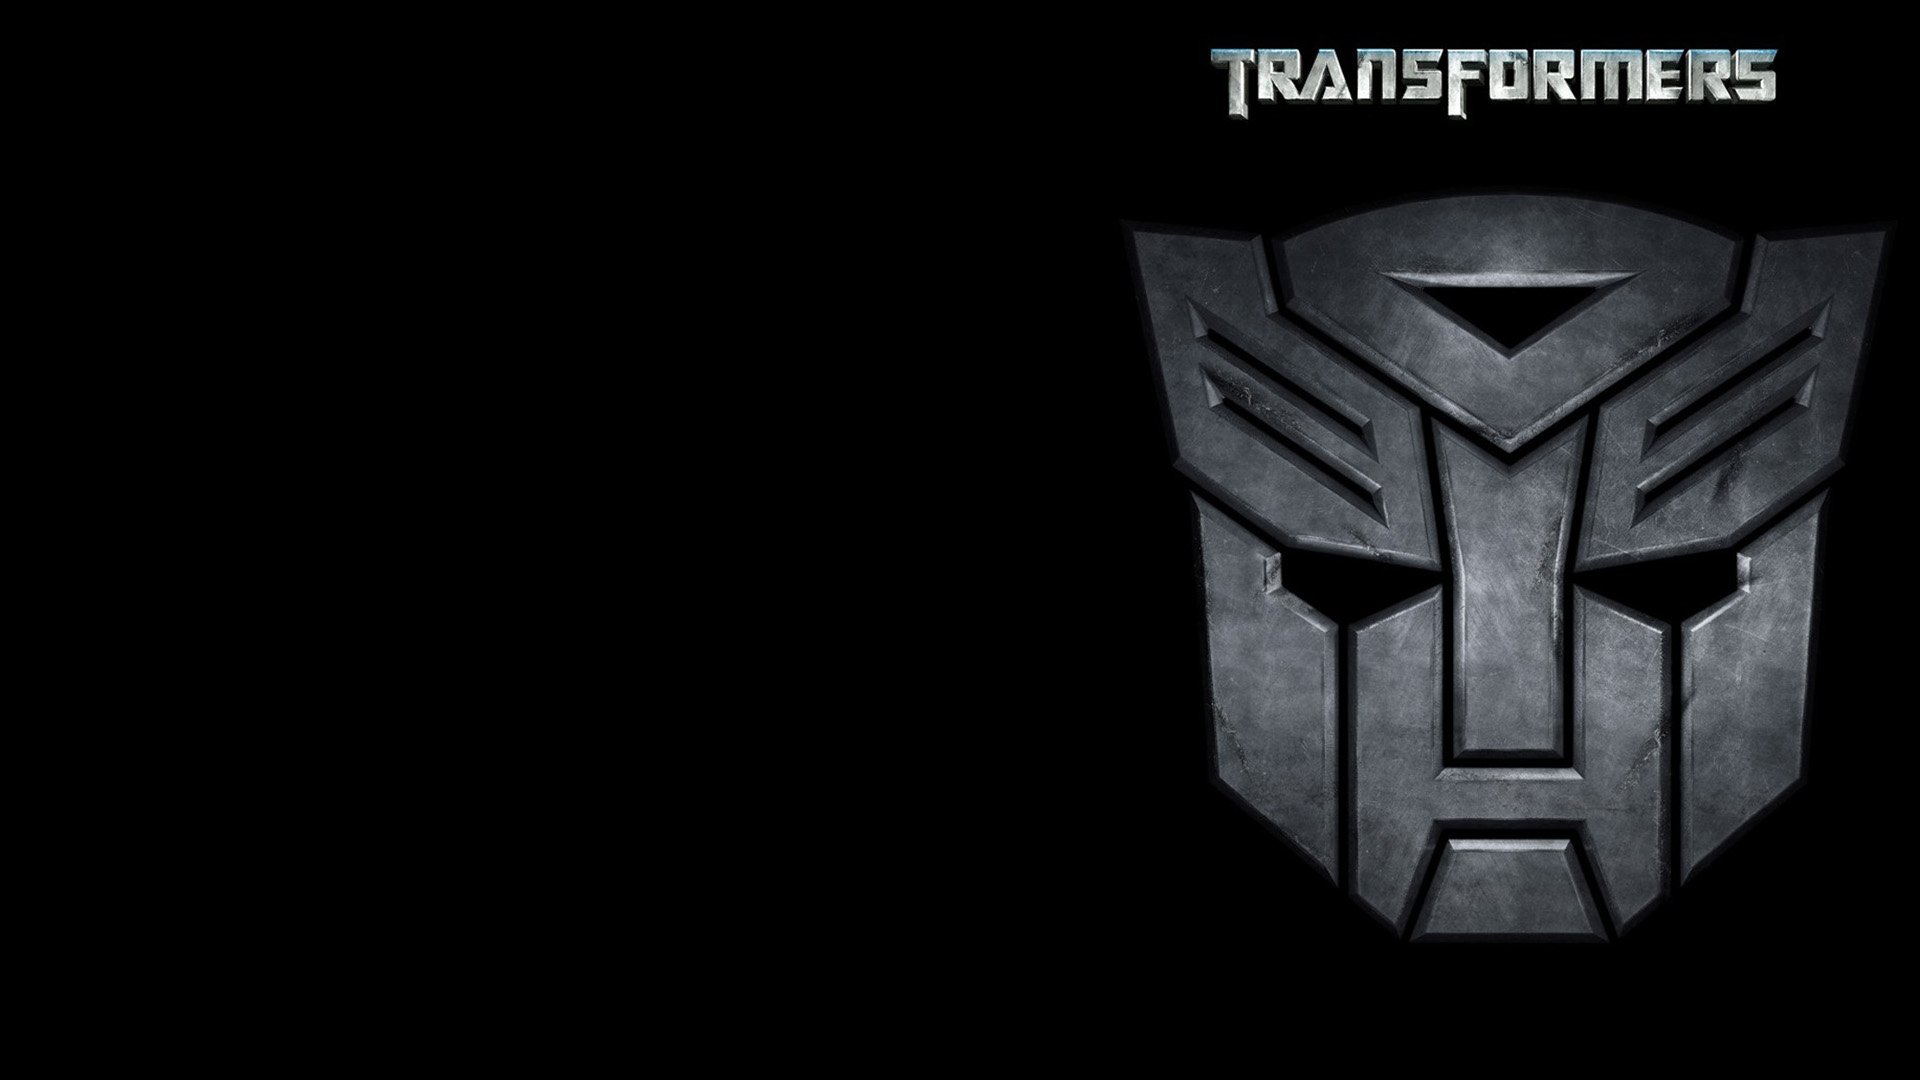 Transformers Autobot Logo Exclusive HD Wallpapers 5141 1920x1080